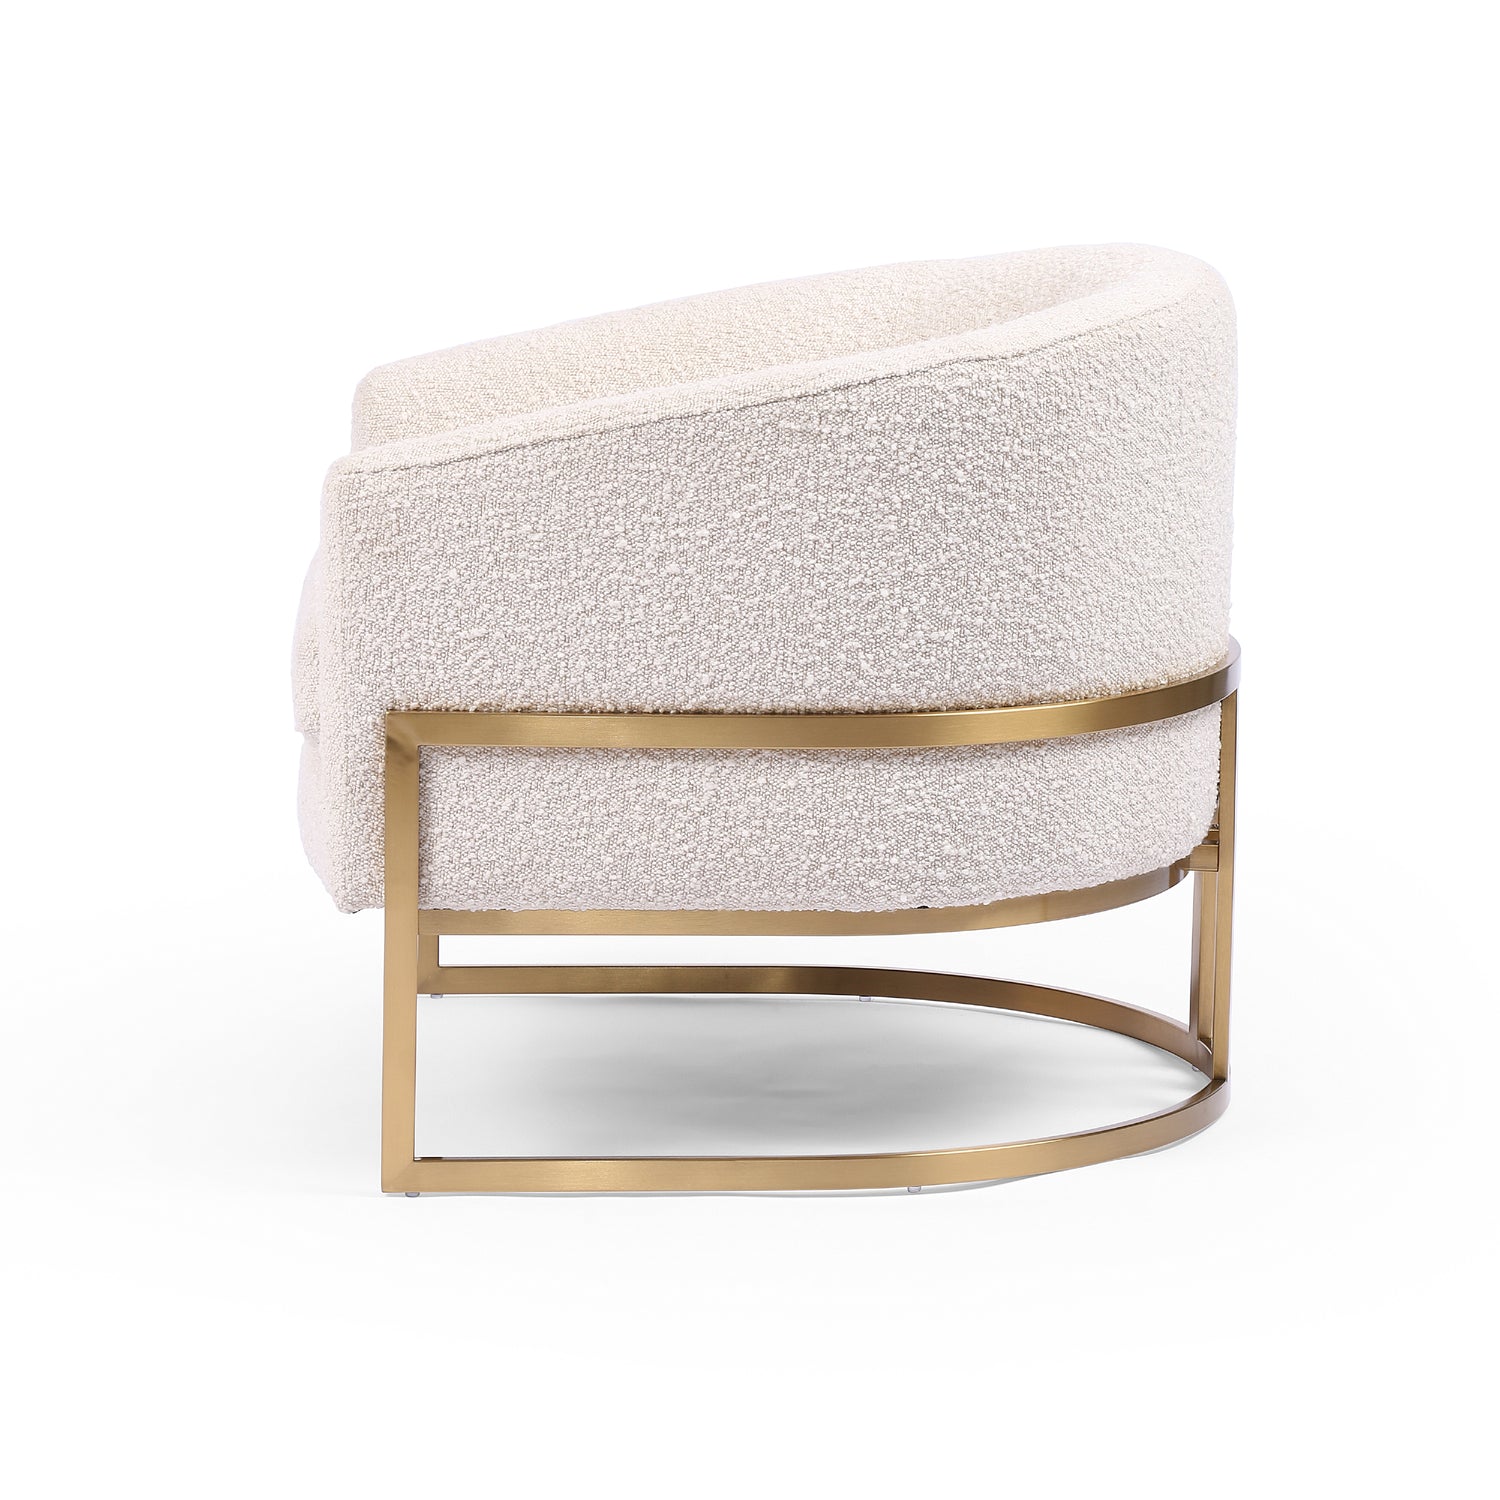 Knoll Natural Fabric with Satin Brass Stainless Steel | Corbin Chair | Valley Ridge Furniture